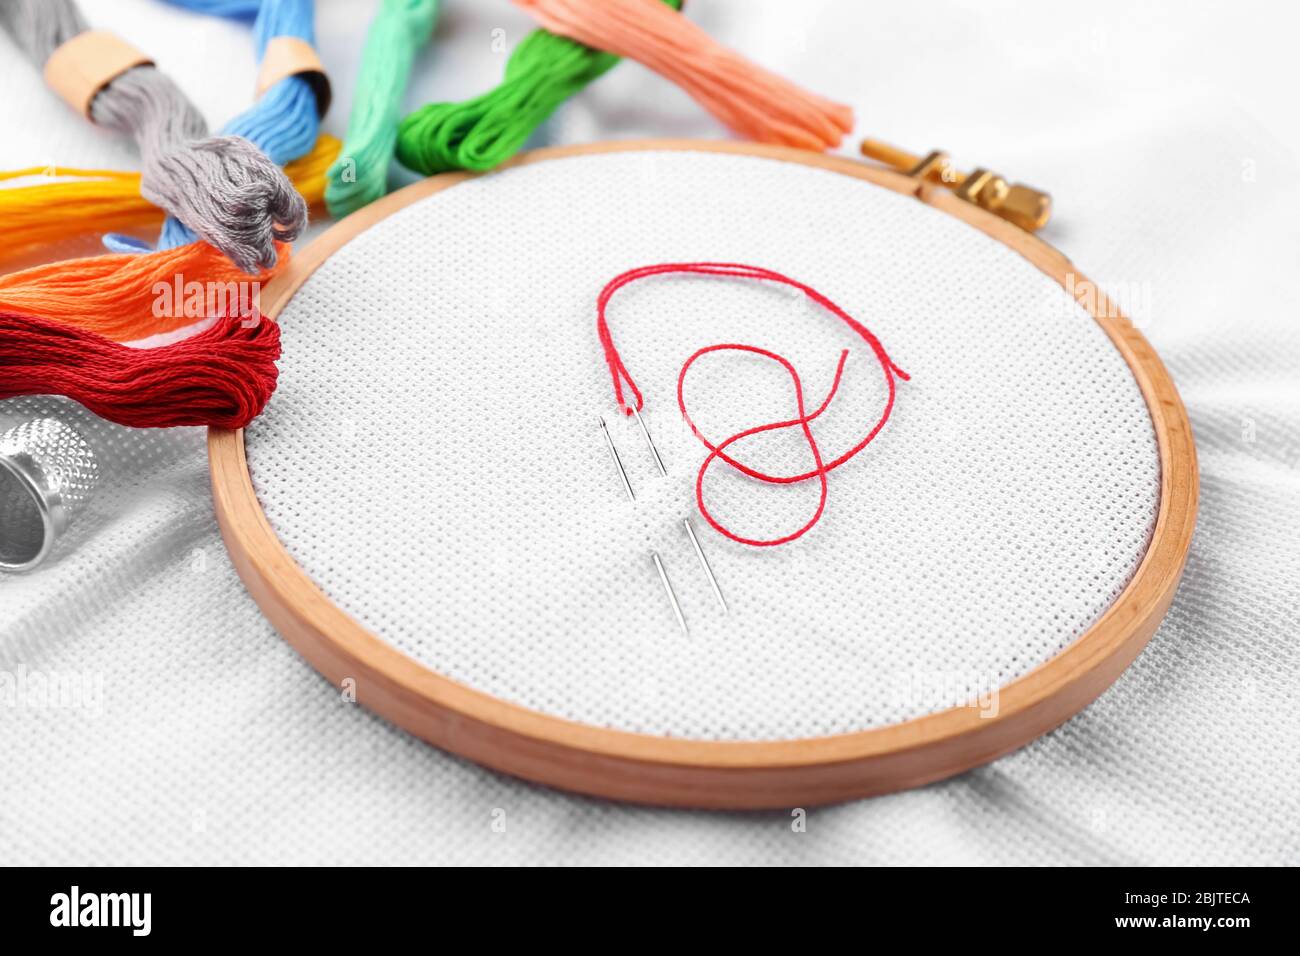 Embroidery hoop with fabric, sewing needles and thread, closeup Stock Photo  - Alamy